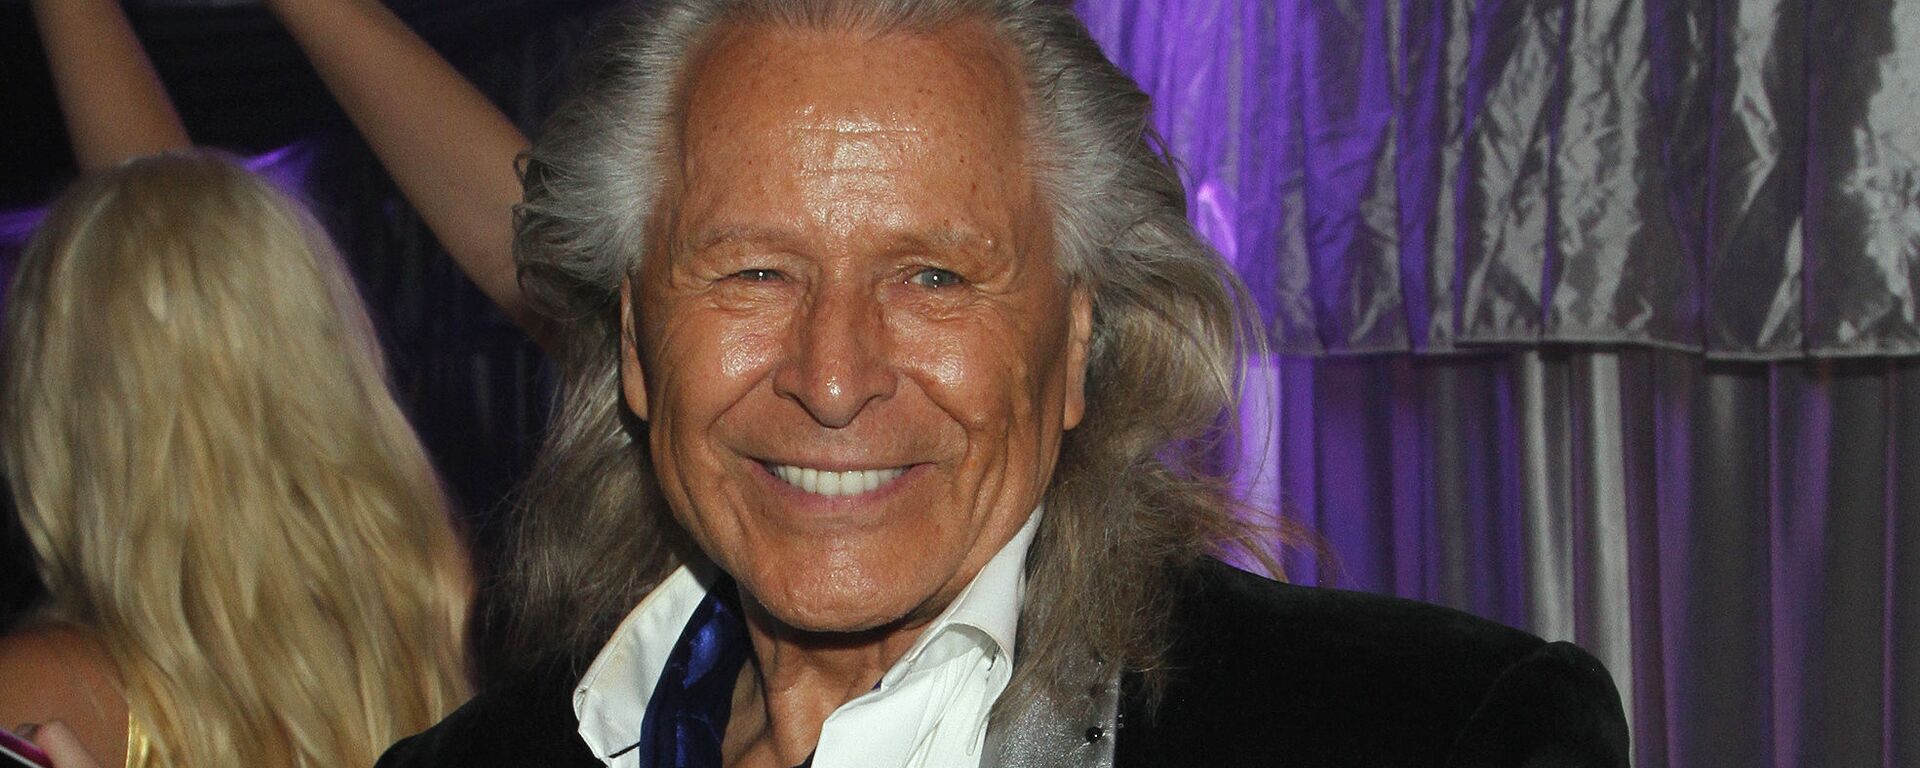 Peter Nygard seen at Fame and Philanthropy's Celebrates the 86th Academy Awards on Sunday, March 2, 2014 at The Vineyard Beverly Hills  in Los Angeles, CA - Sputnik International, 1920, 28.01.2021